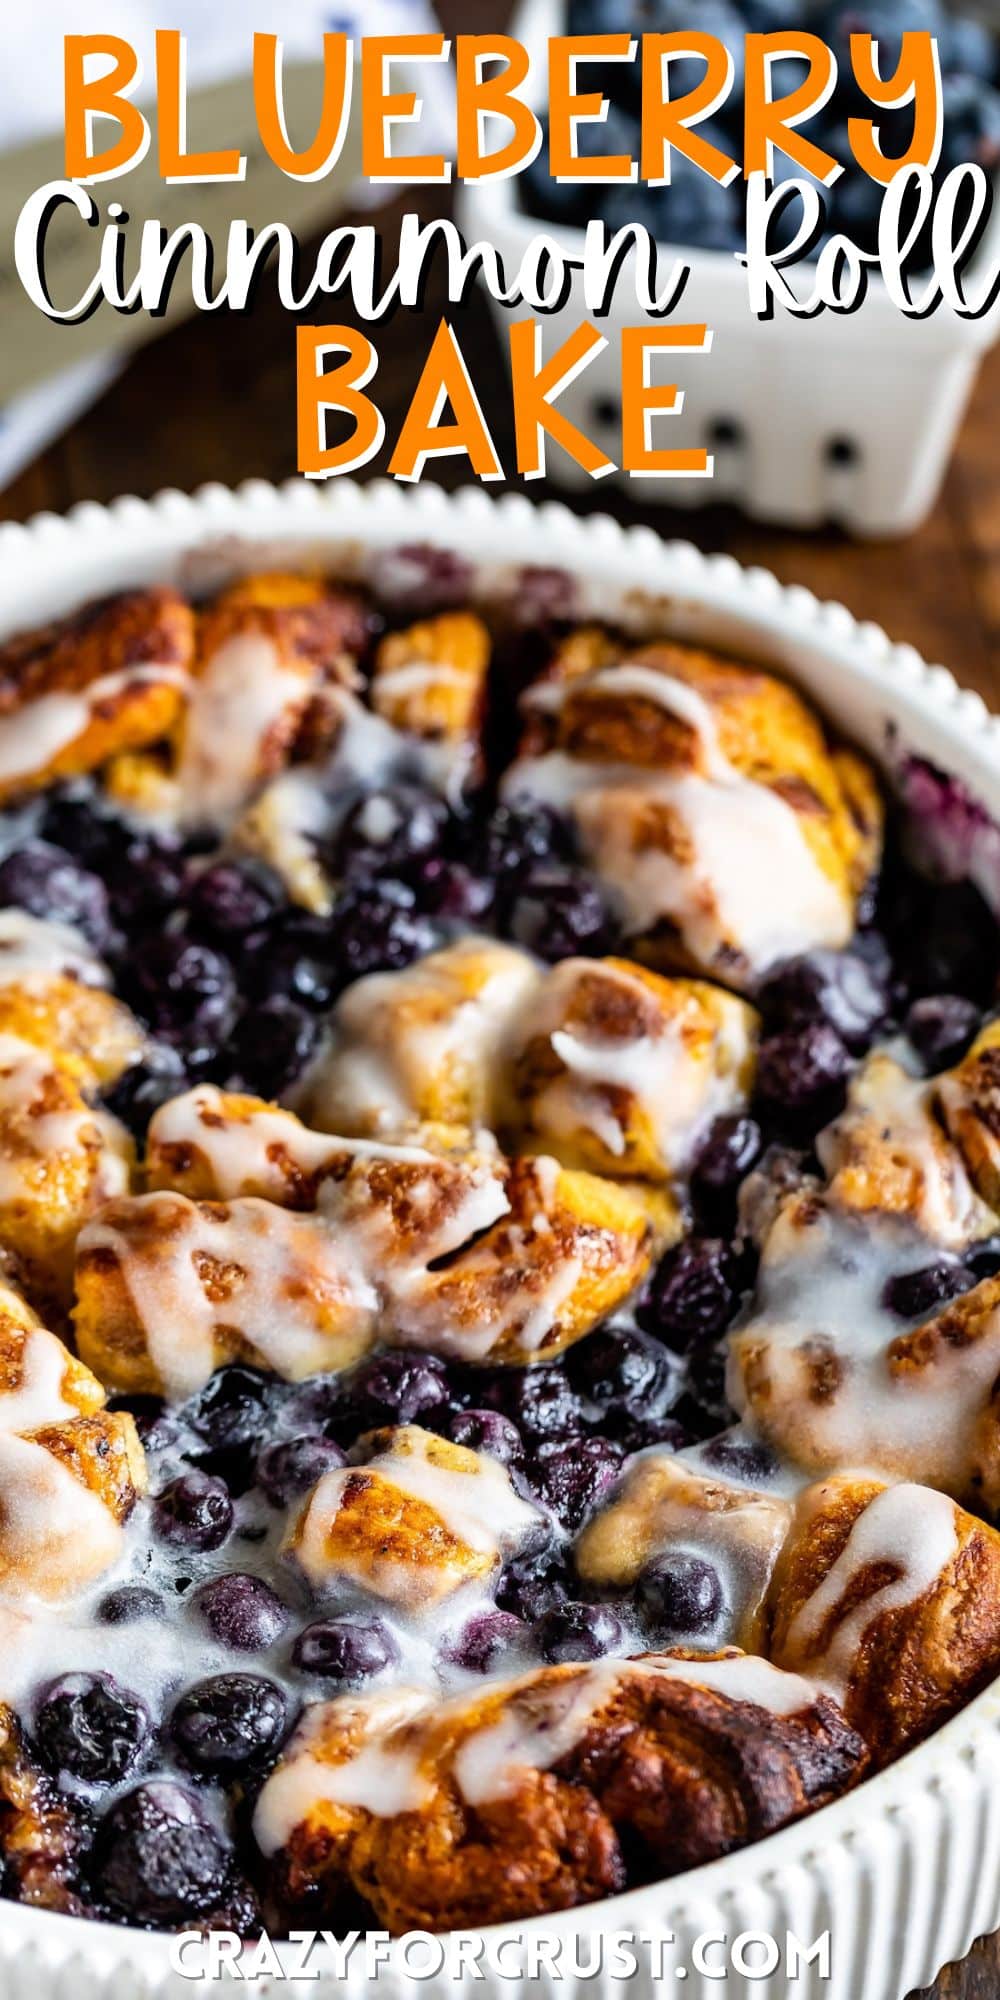 cinnamon roll bake with blueberries baked in a white pan with words on the image.